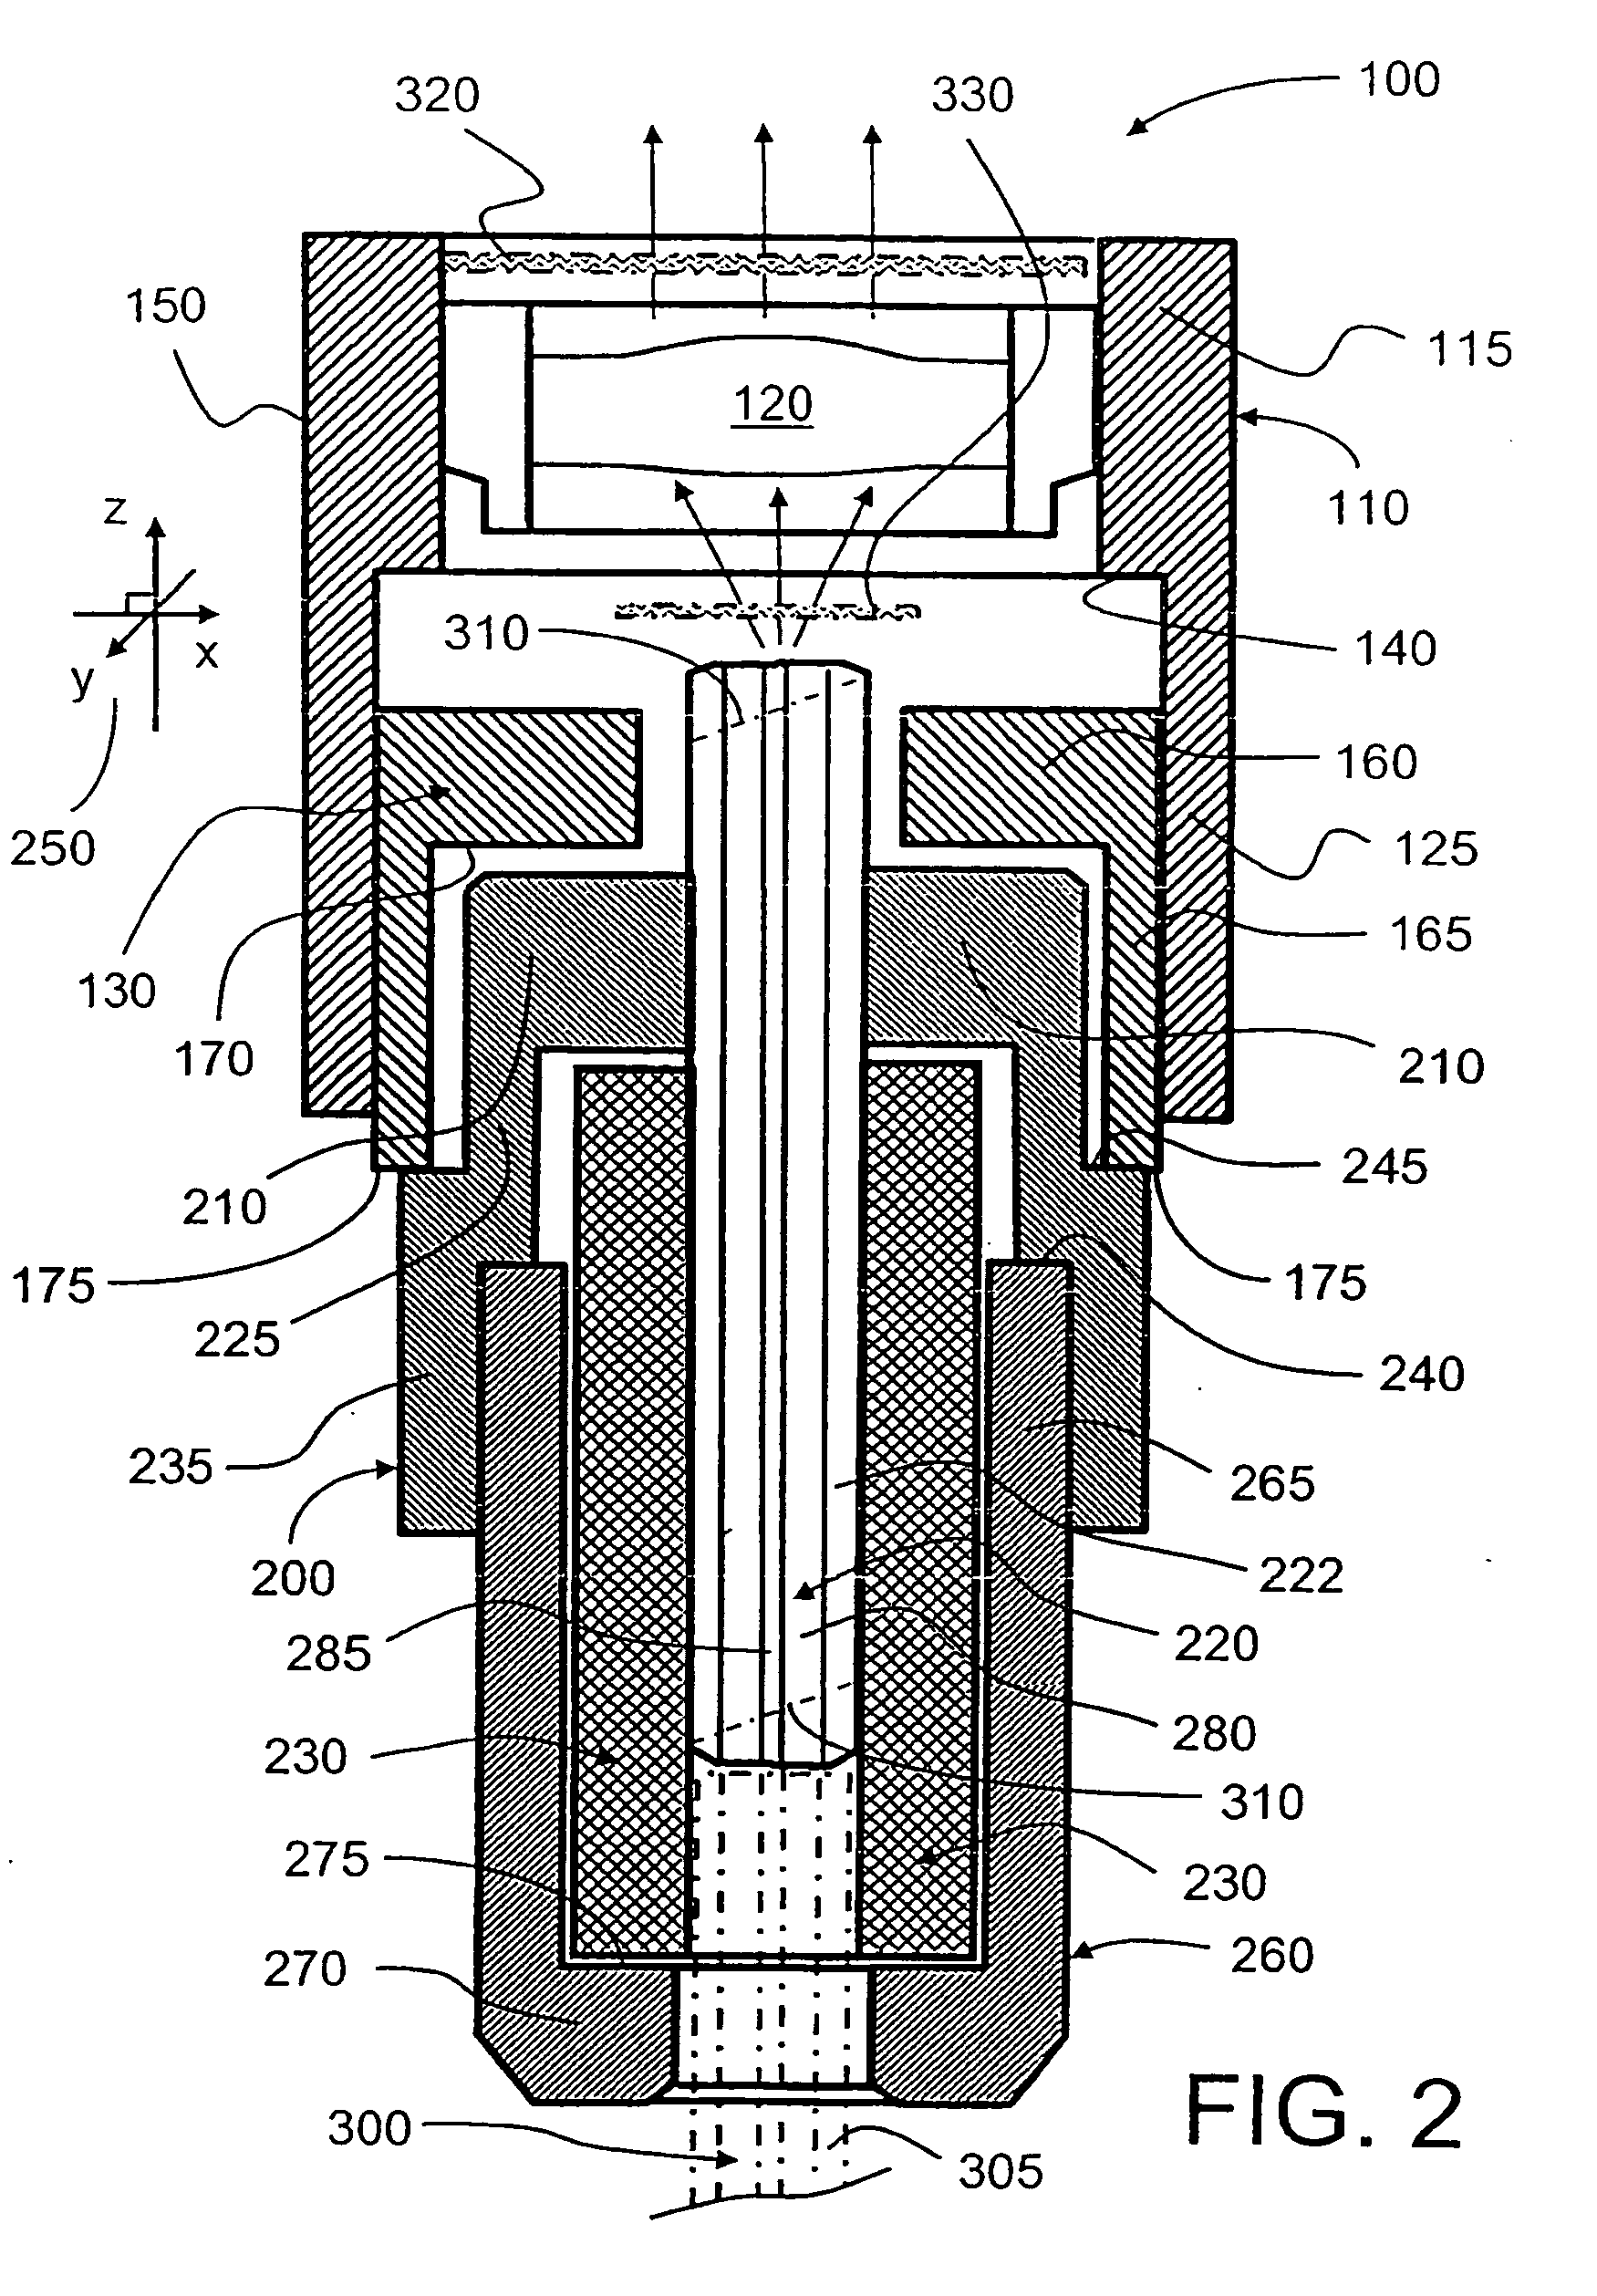 Optical Assembly for Repetitive Coupling and Uncoupling